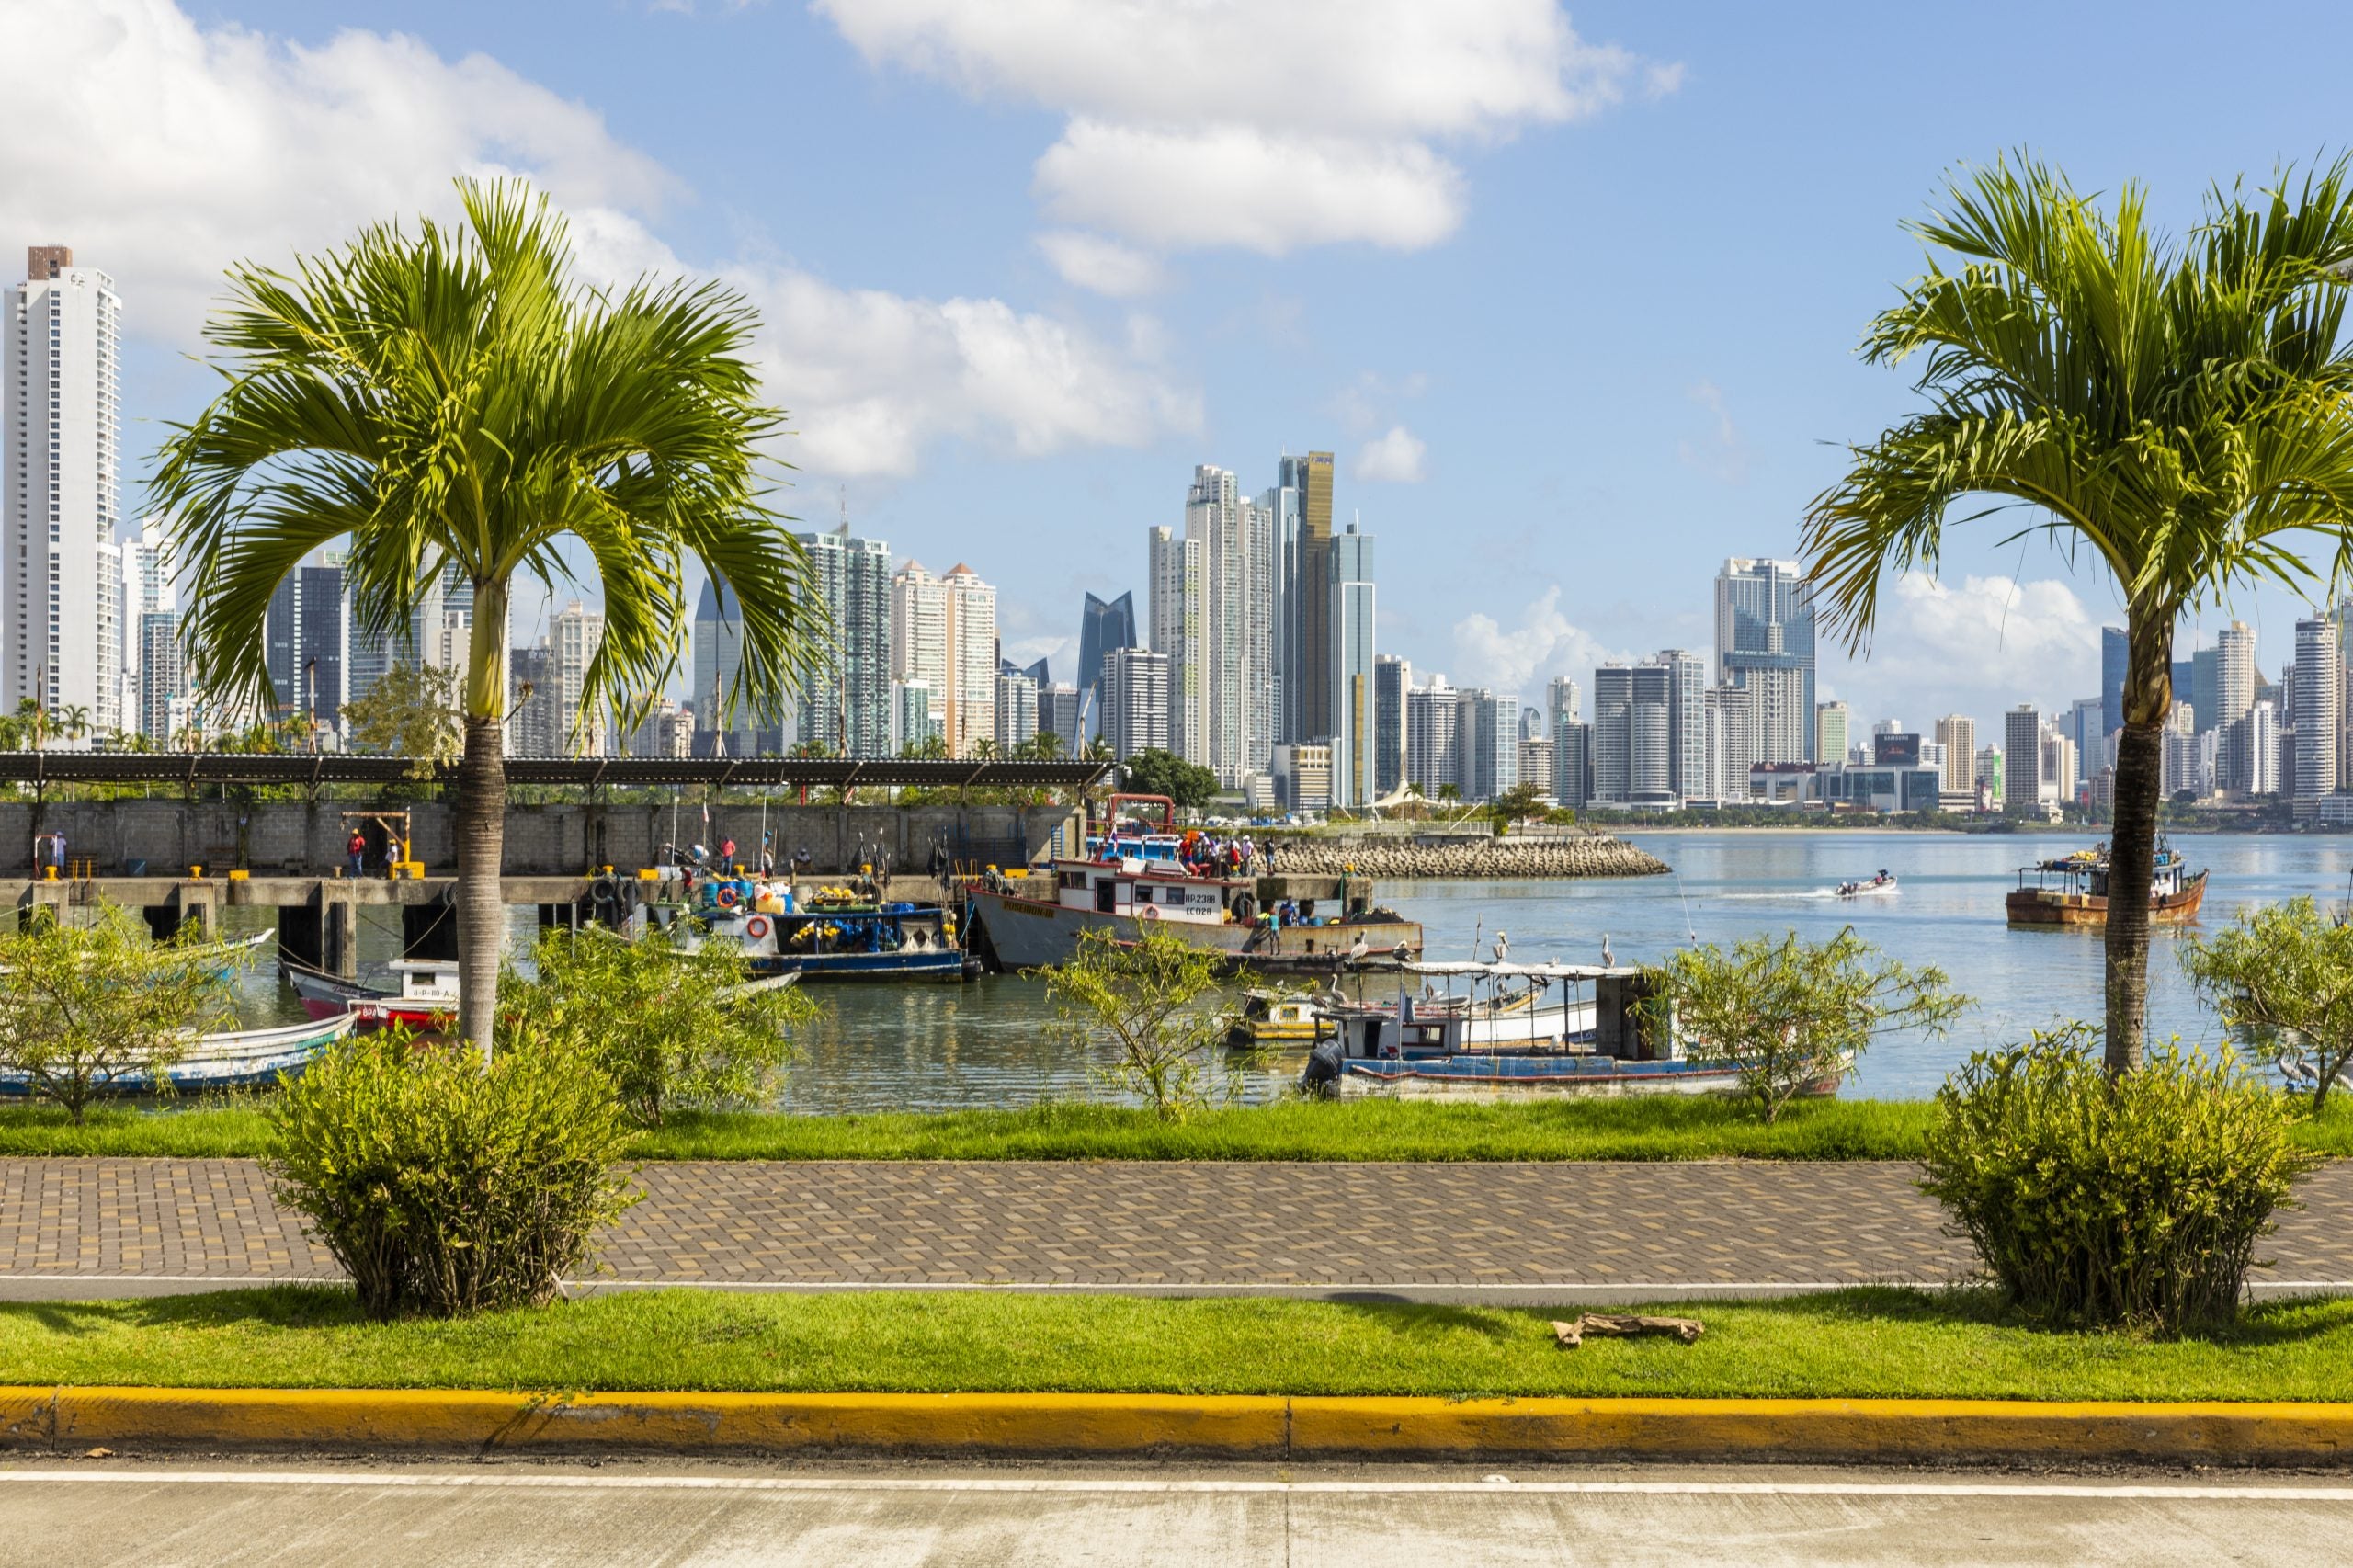 The Black Girl’s Guide To Panama City